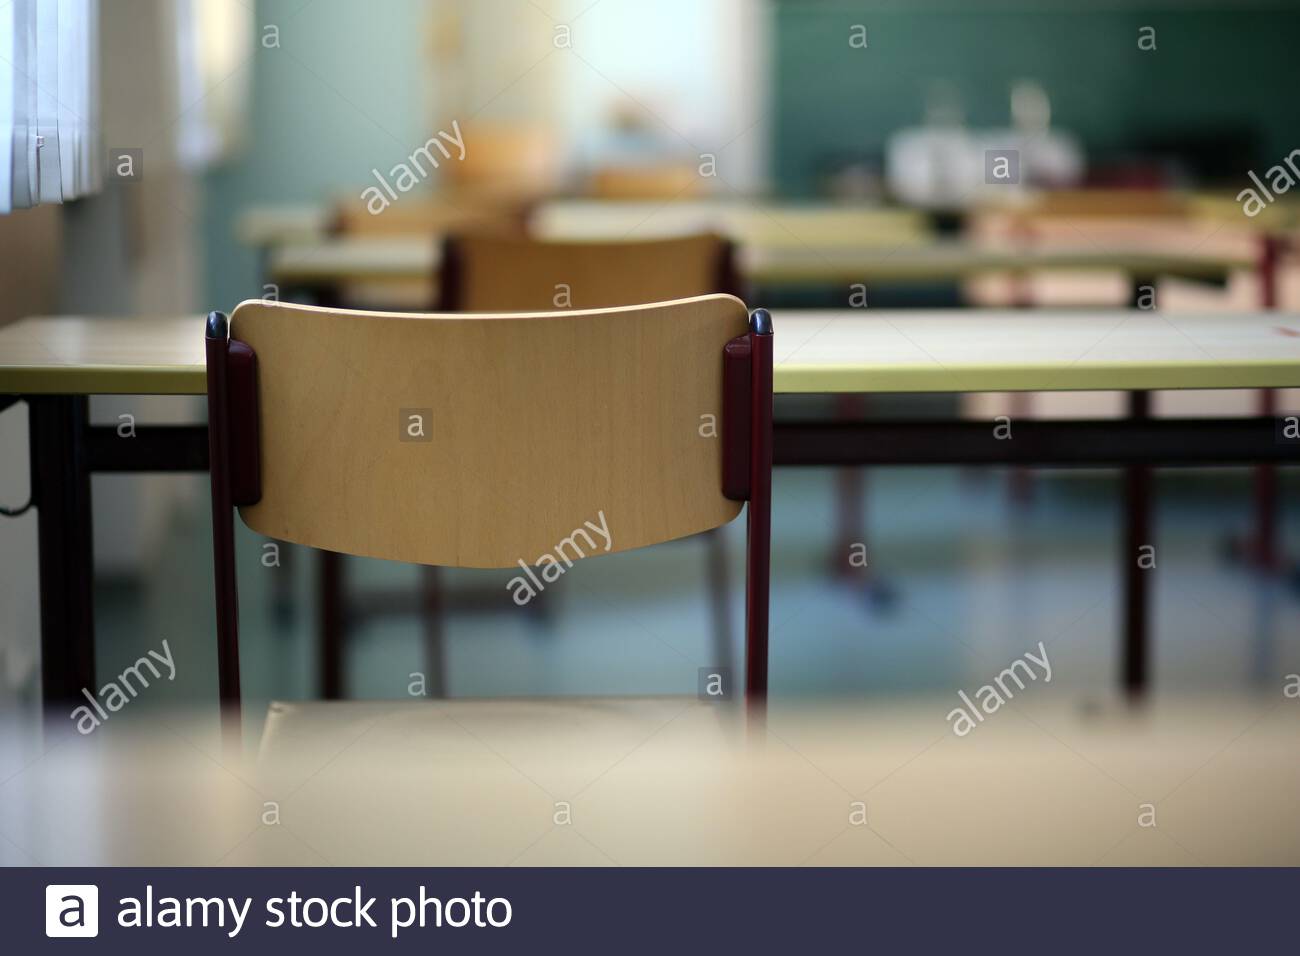 Unoccupied school chairs and desks in Germany during the Corona crisis. It is hoped to return to normal lessons soon. Stock Photo